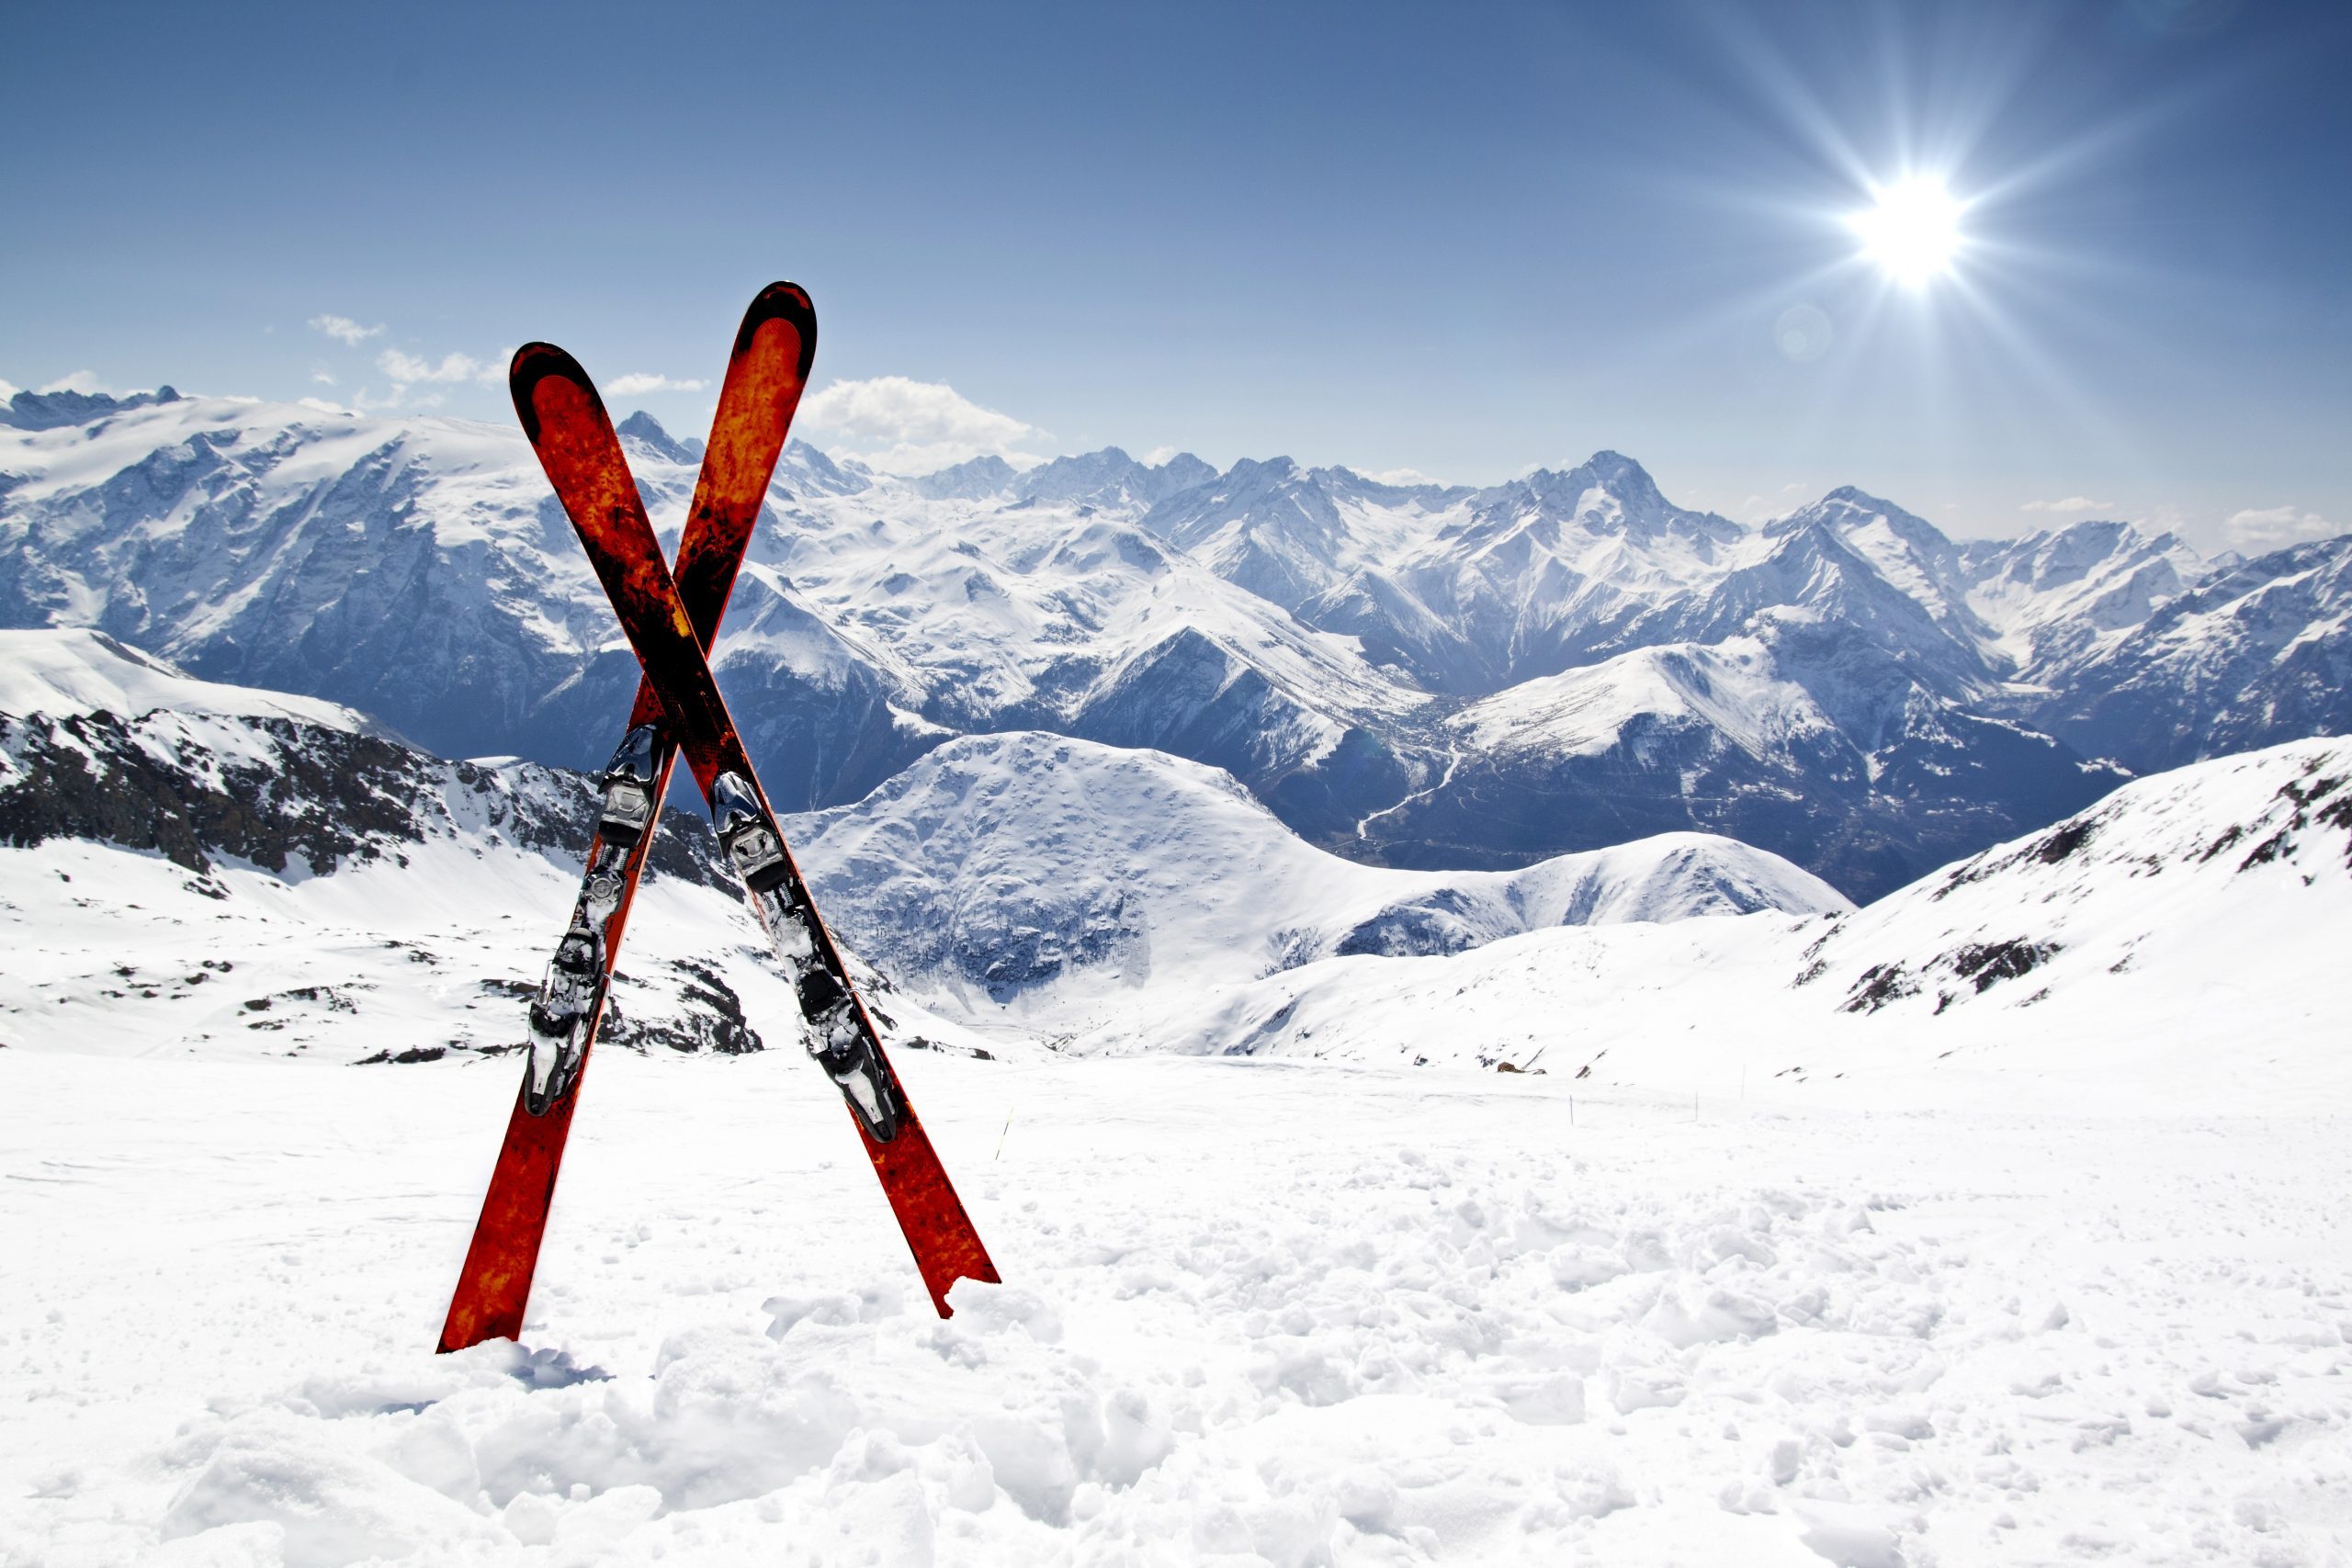 Best Luxury Ski Resorts for Shopping. Alps Boutiques and Fashion Stores